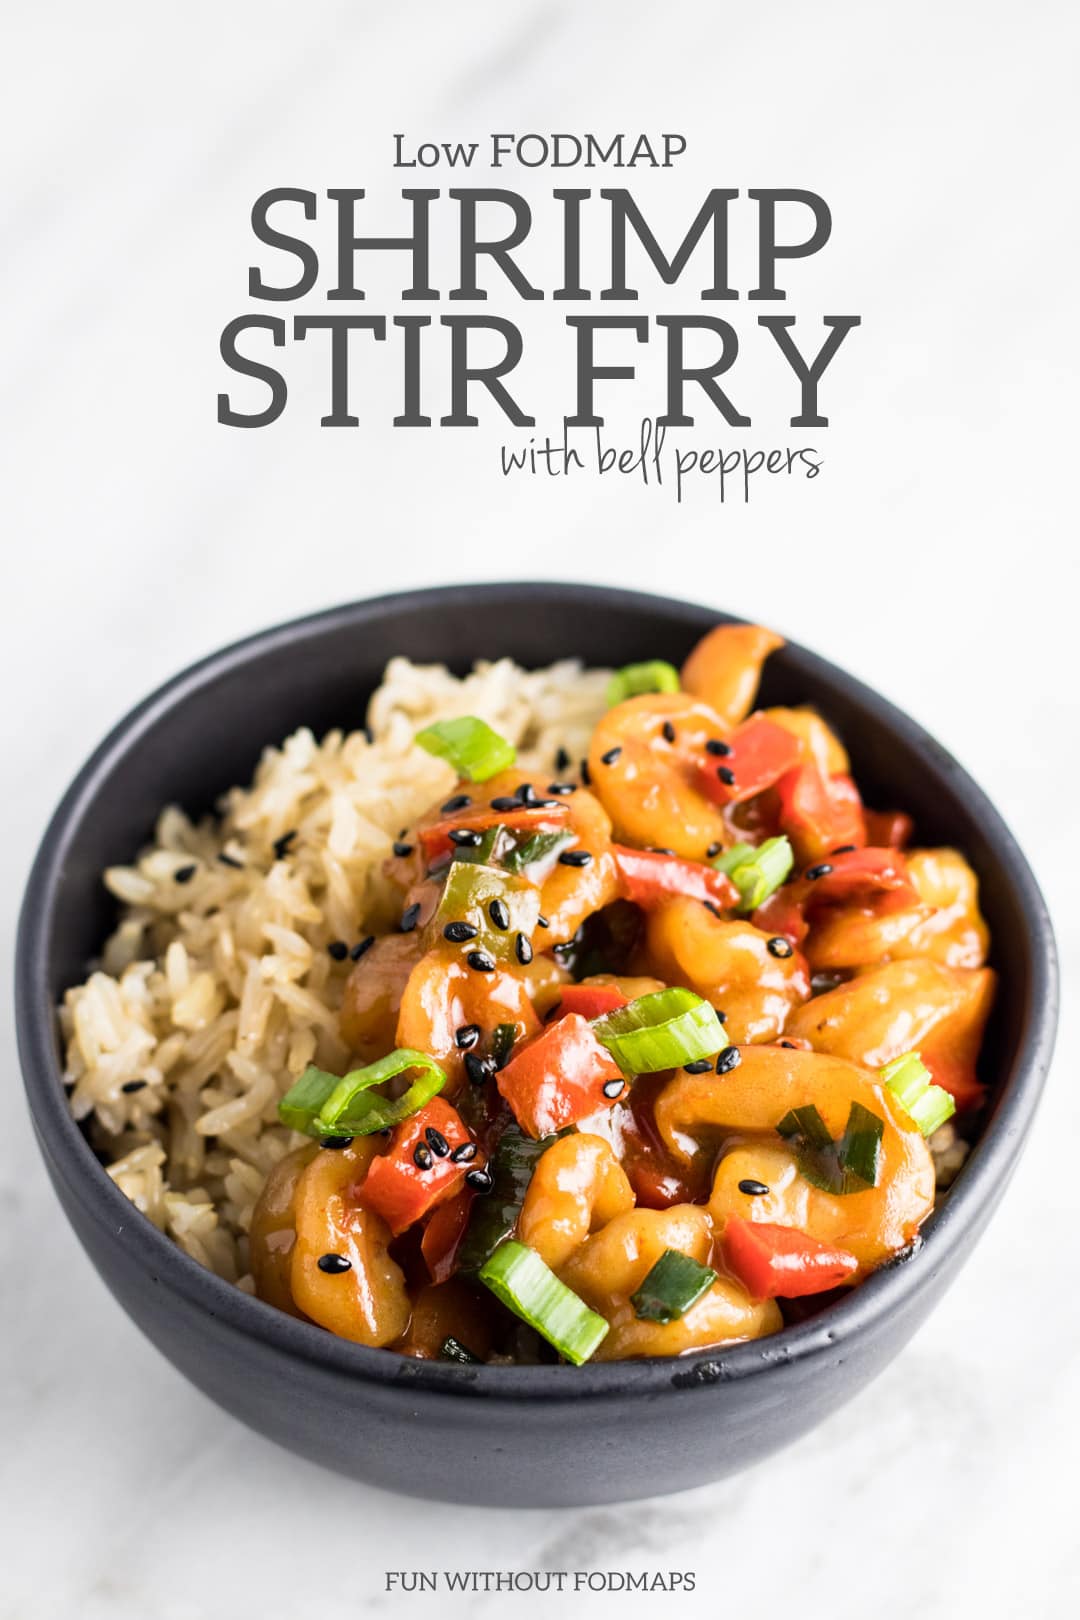 Low FODMAP Shrimp Stir Fry with Bell Peppers